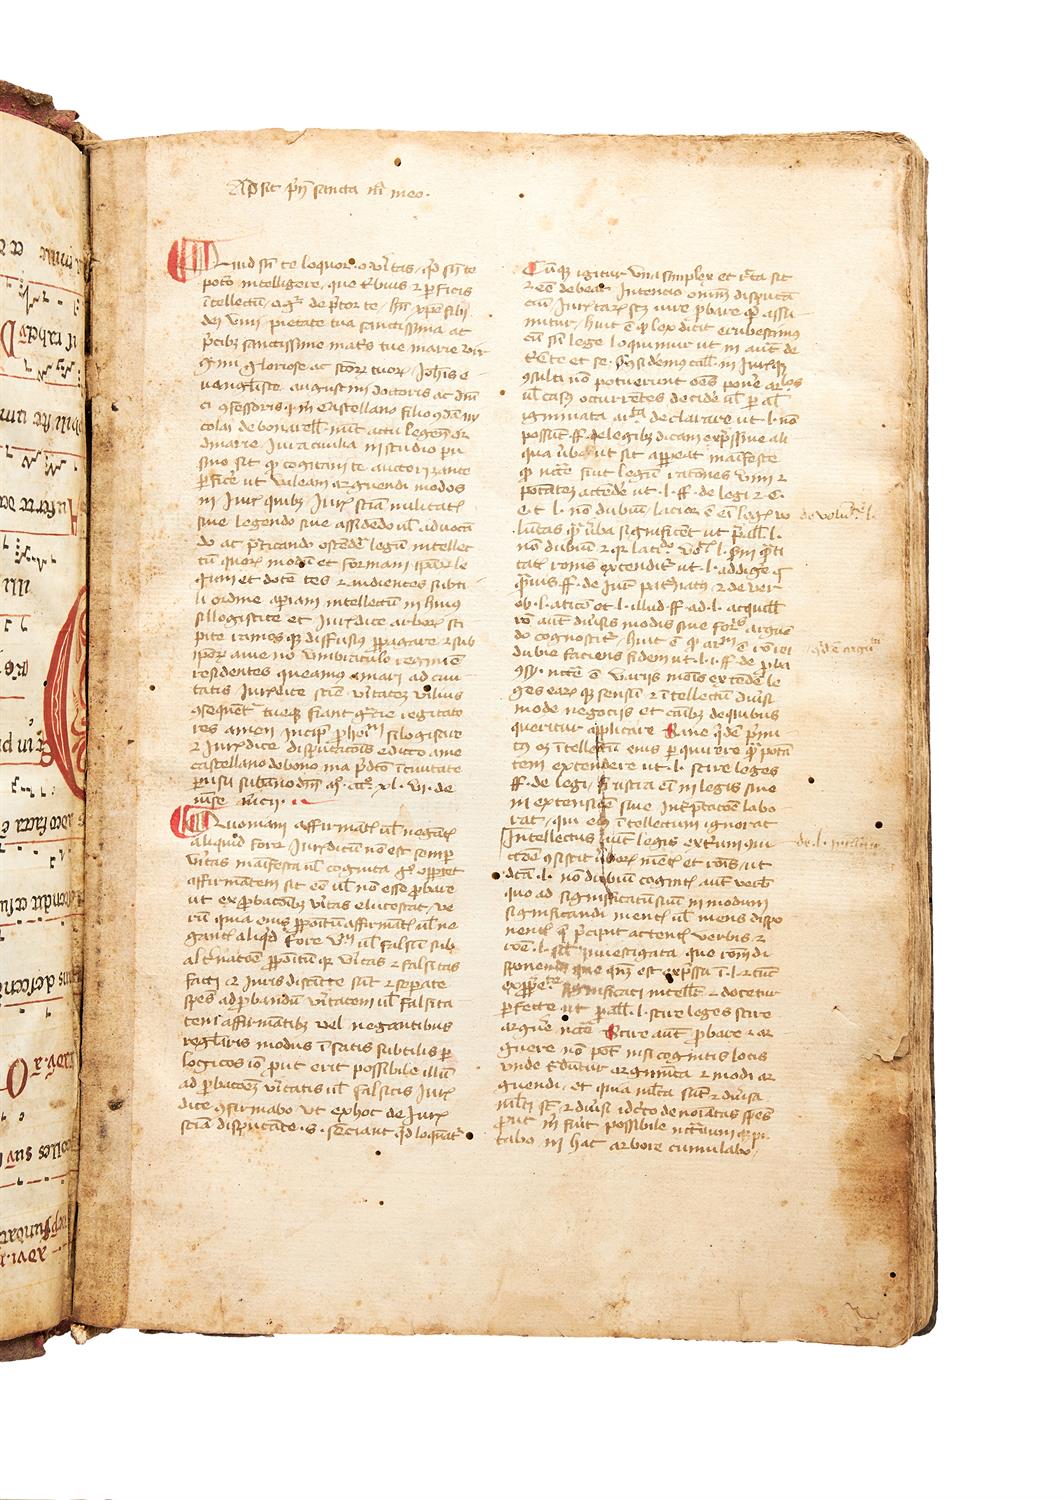 Ɵ Legal compendium, manuscript on paper [Italy, late 14th century or the early 15th century]